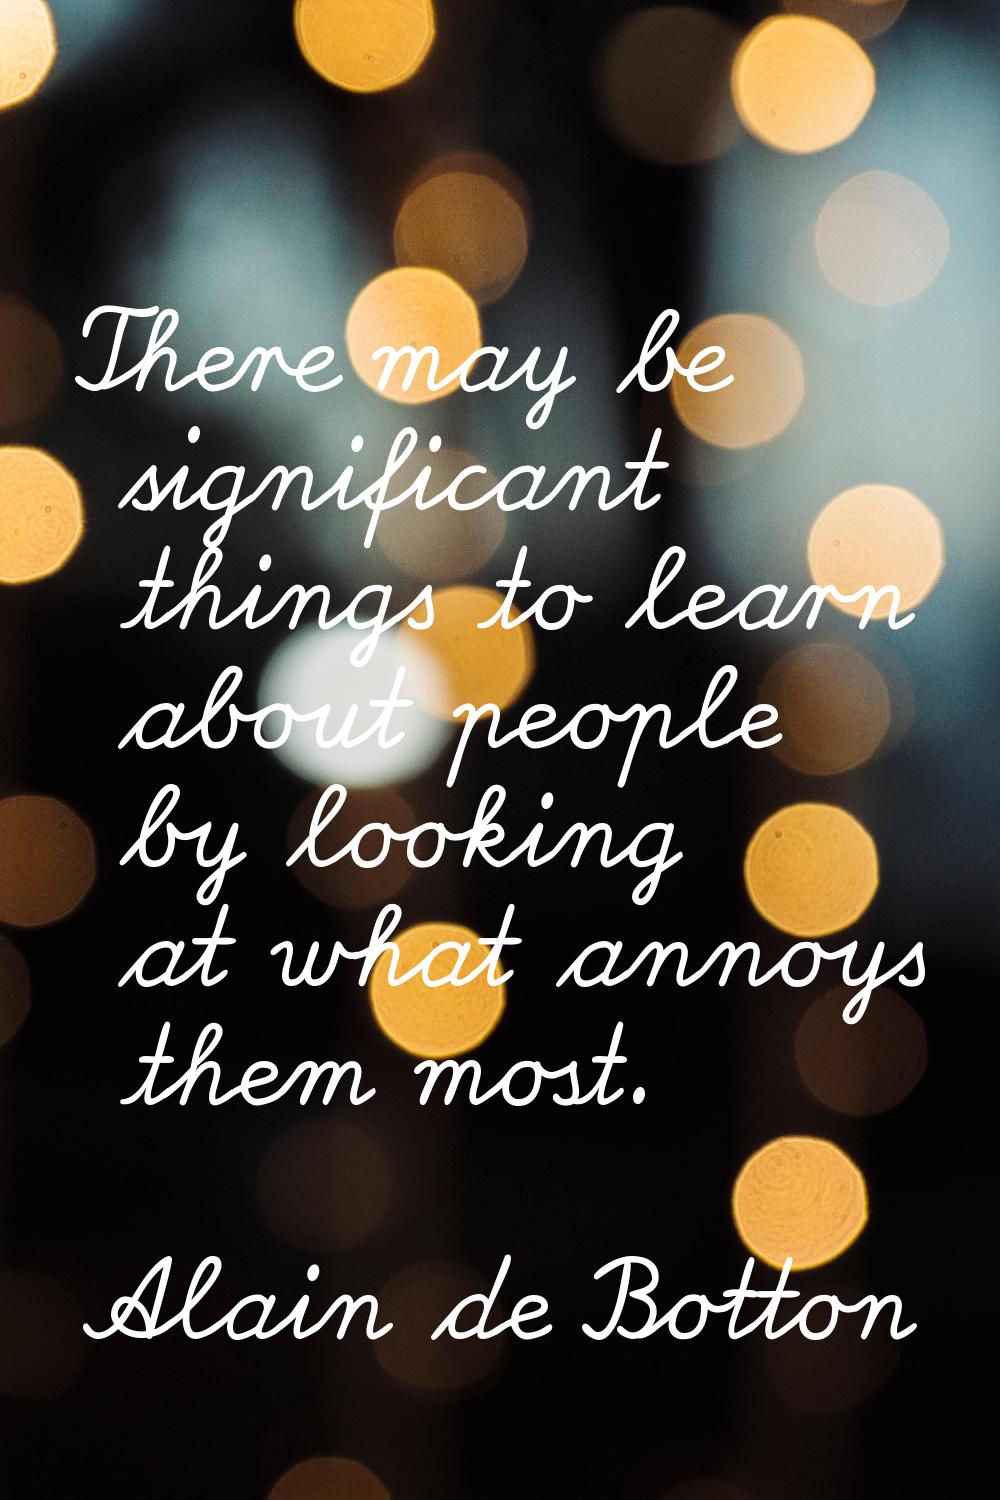 There may be significant things to learn about people by looking at what annoys them most.